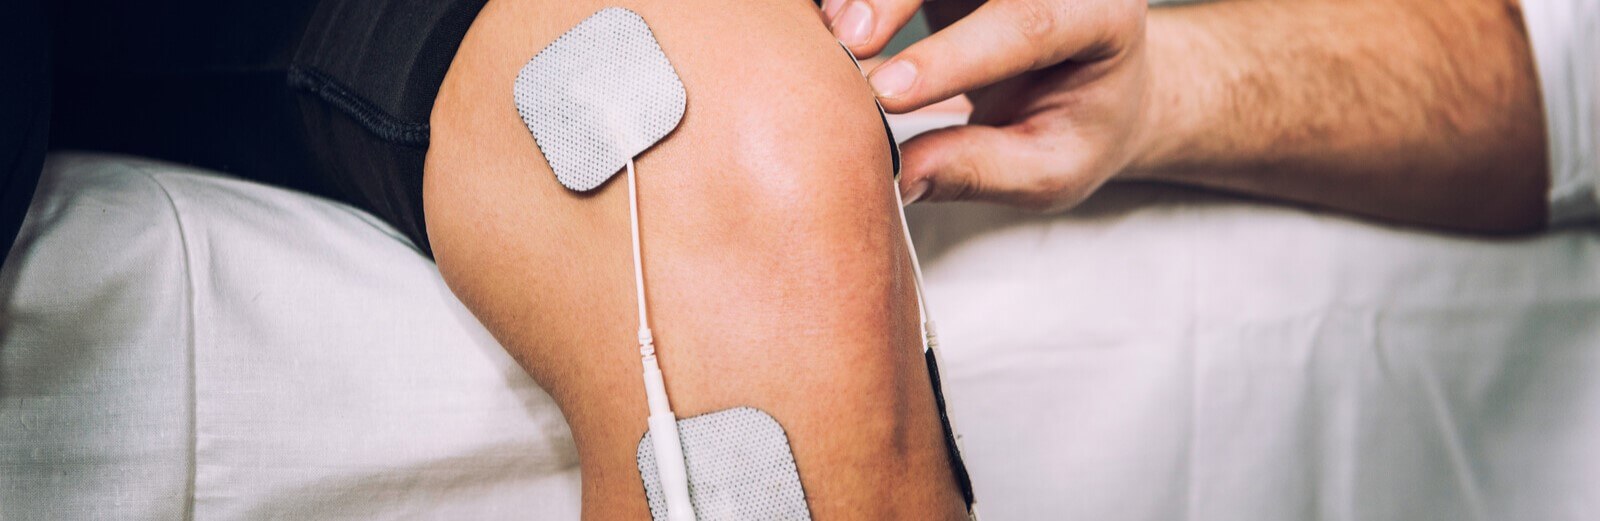 Man using TENS machines for treating musculoskeletal pain